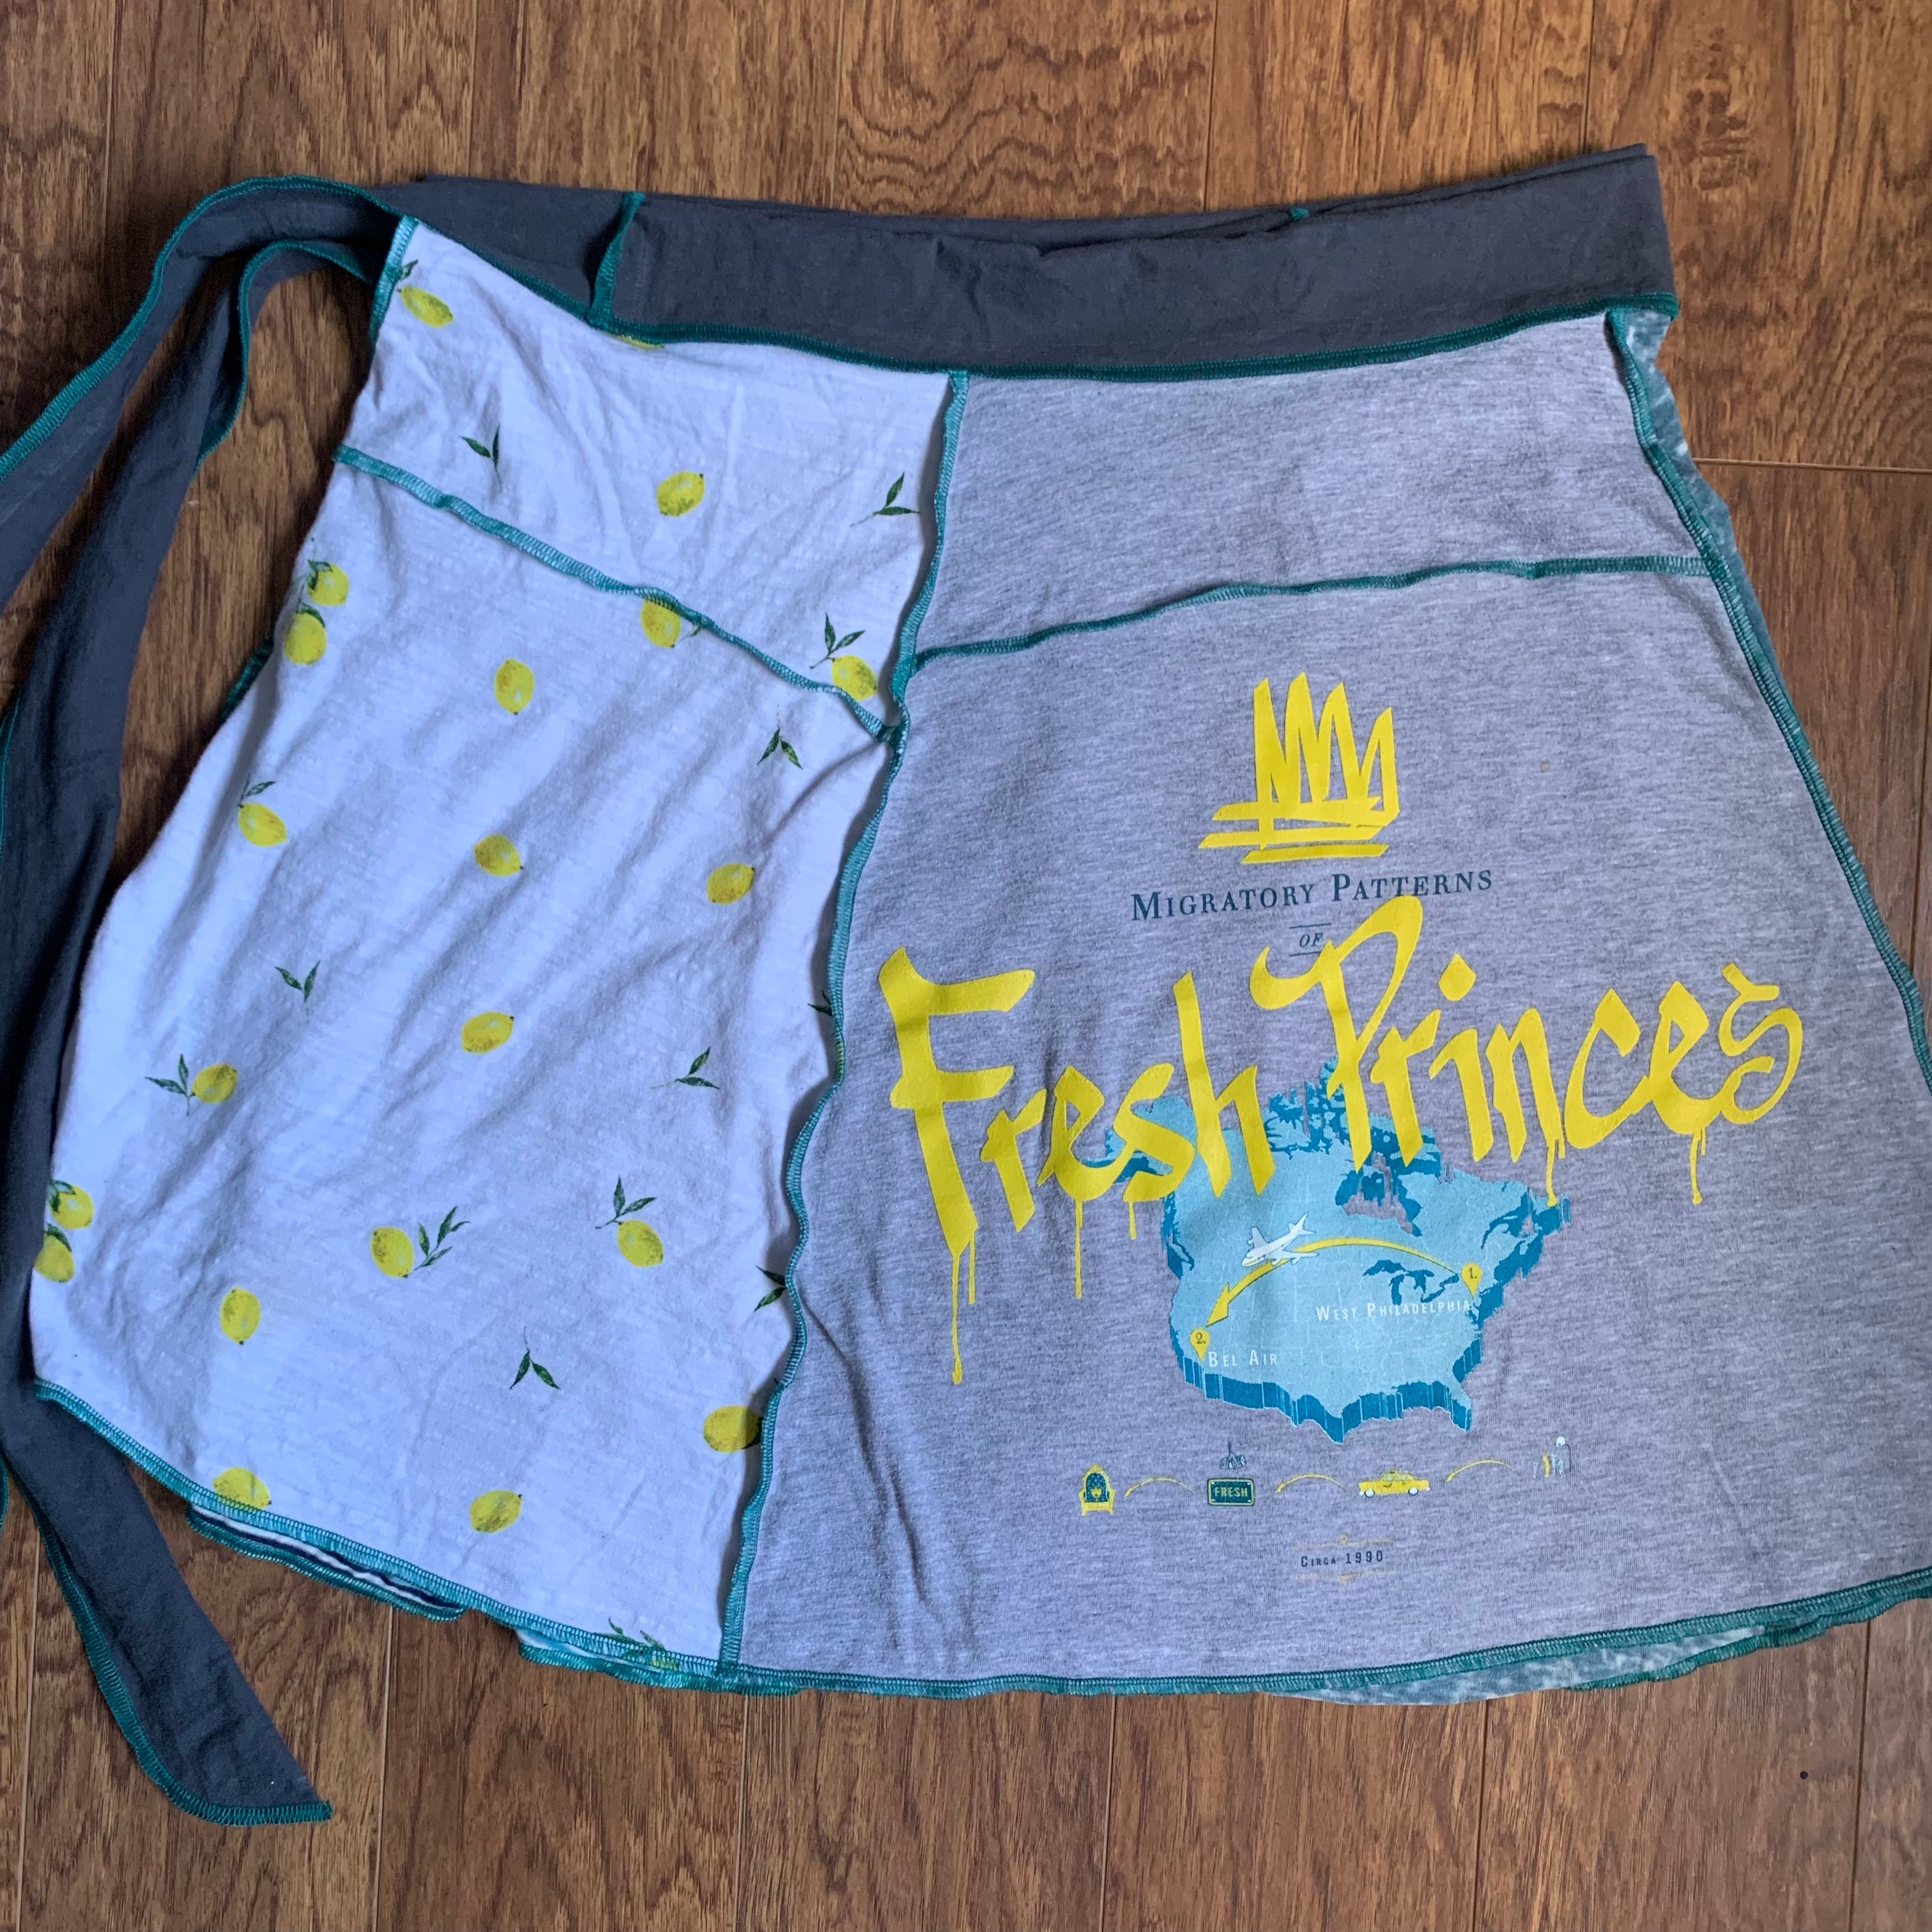 Migratory Patterns of Fresh Princes Upcycled T-shirt Wrap Skirt